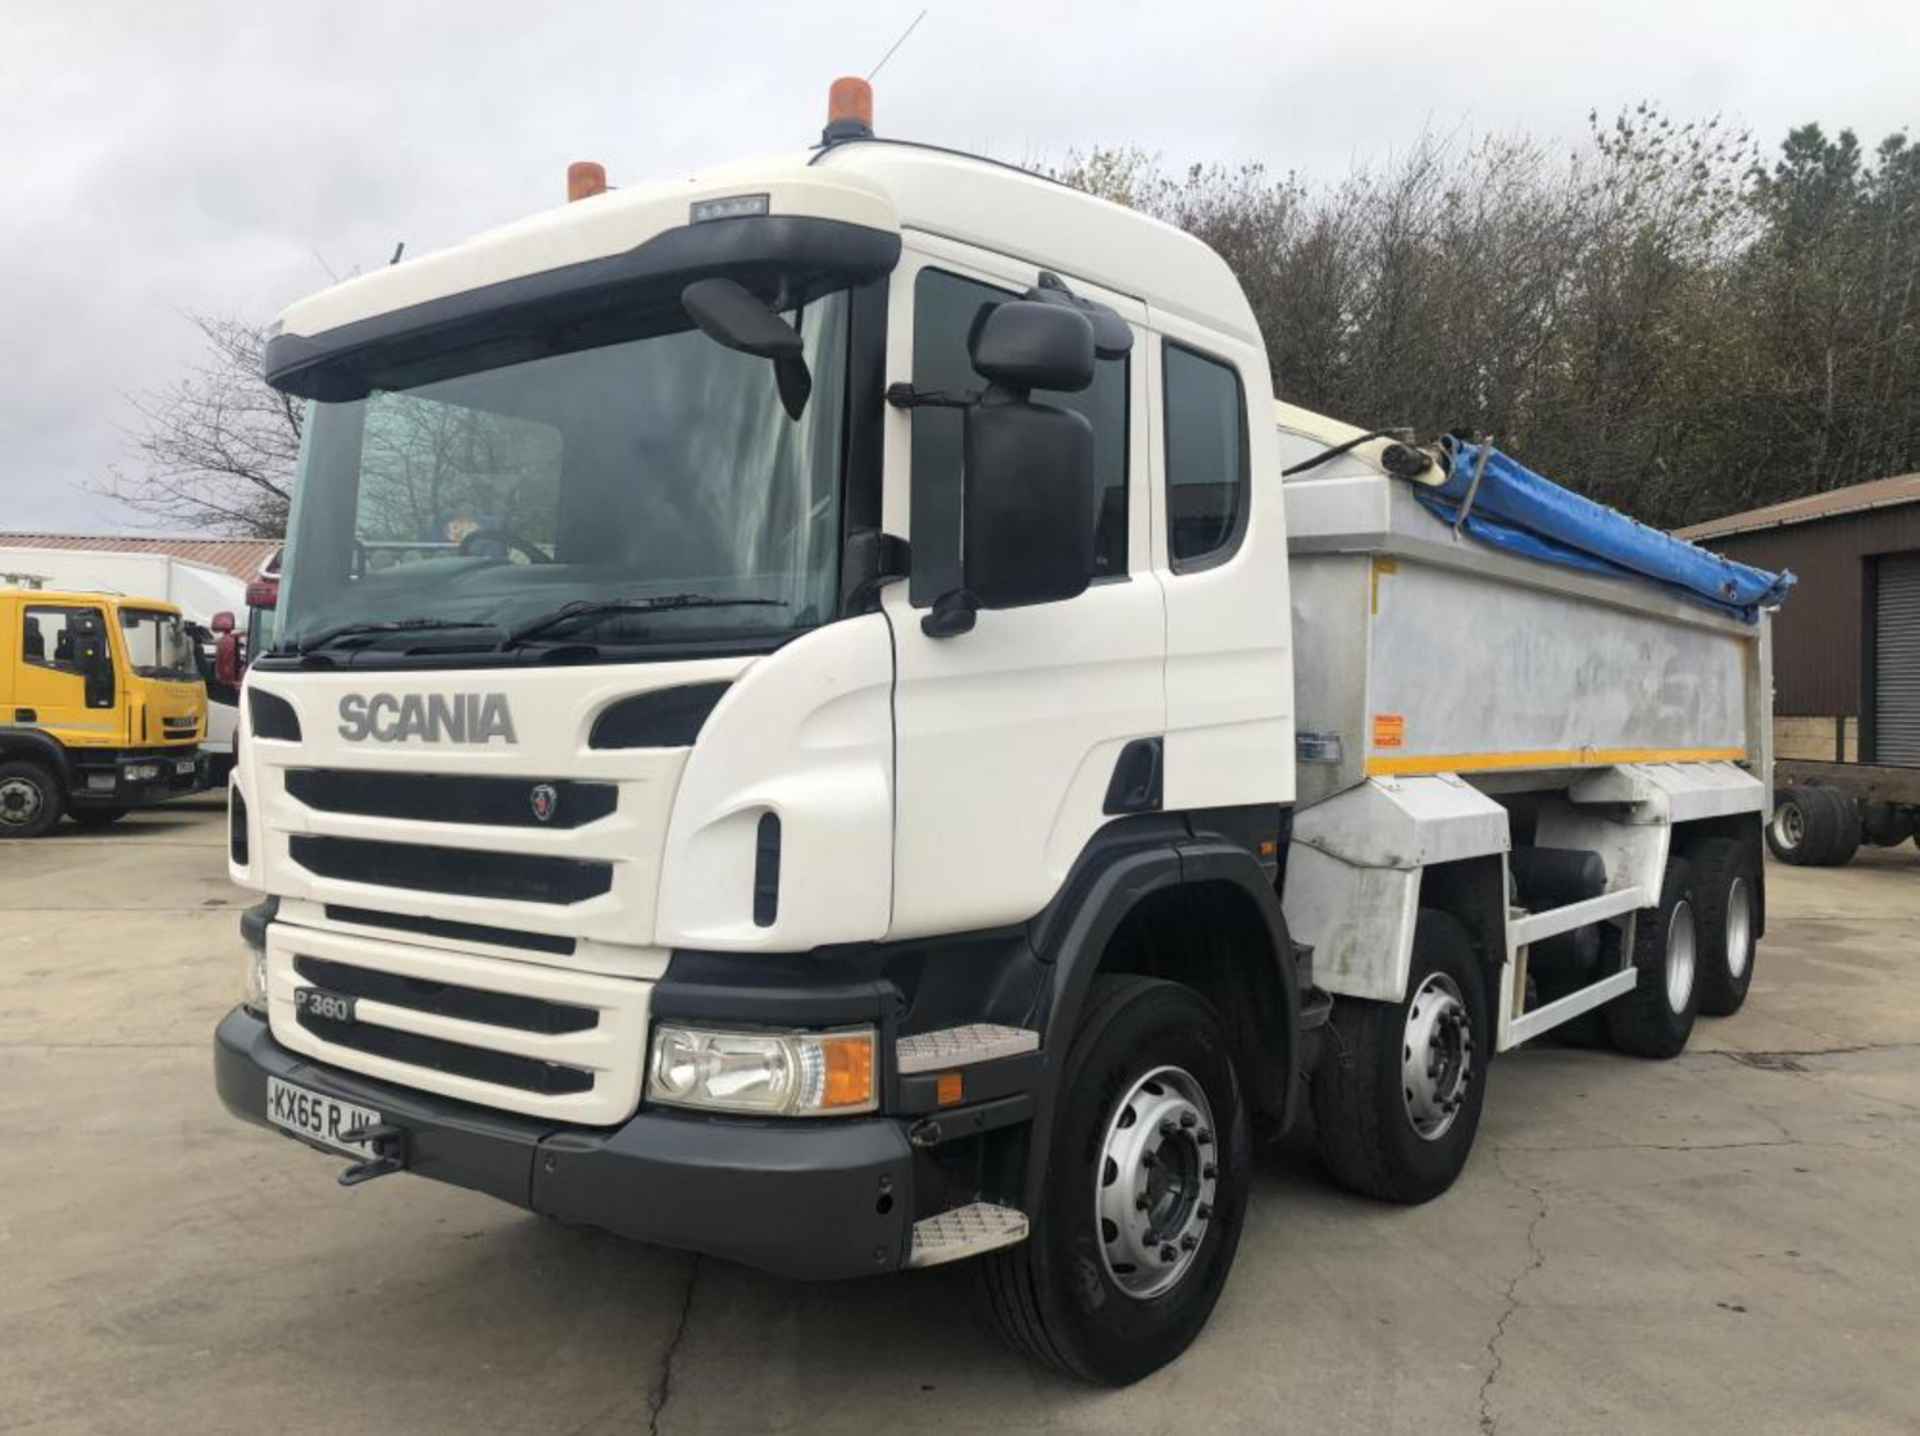 2015/65 PLATE SCANIA P360 8x4 ALLOY TIPPER WILCOX WILCO LIGHT BODY HYVA TIPPING GEAR *PLUS VAT* - Image 2 of 16